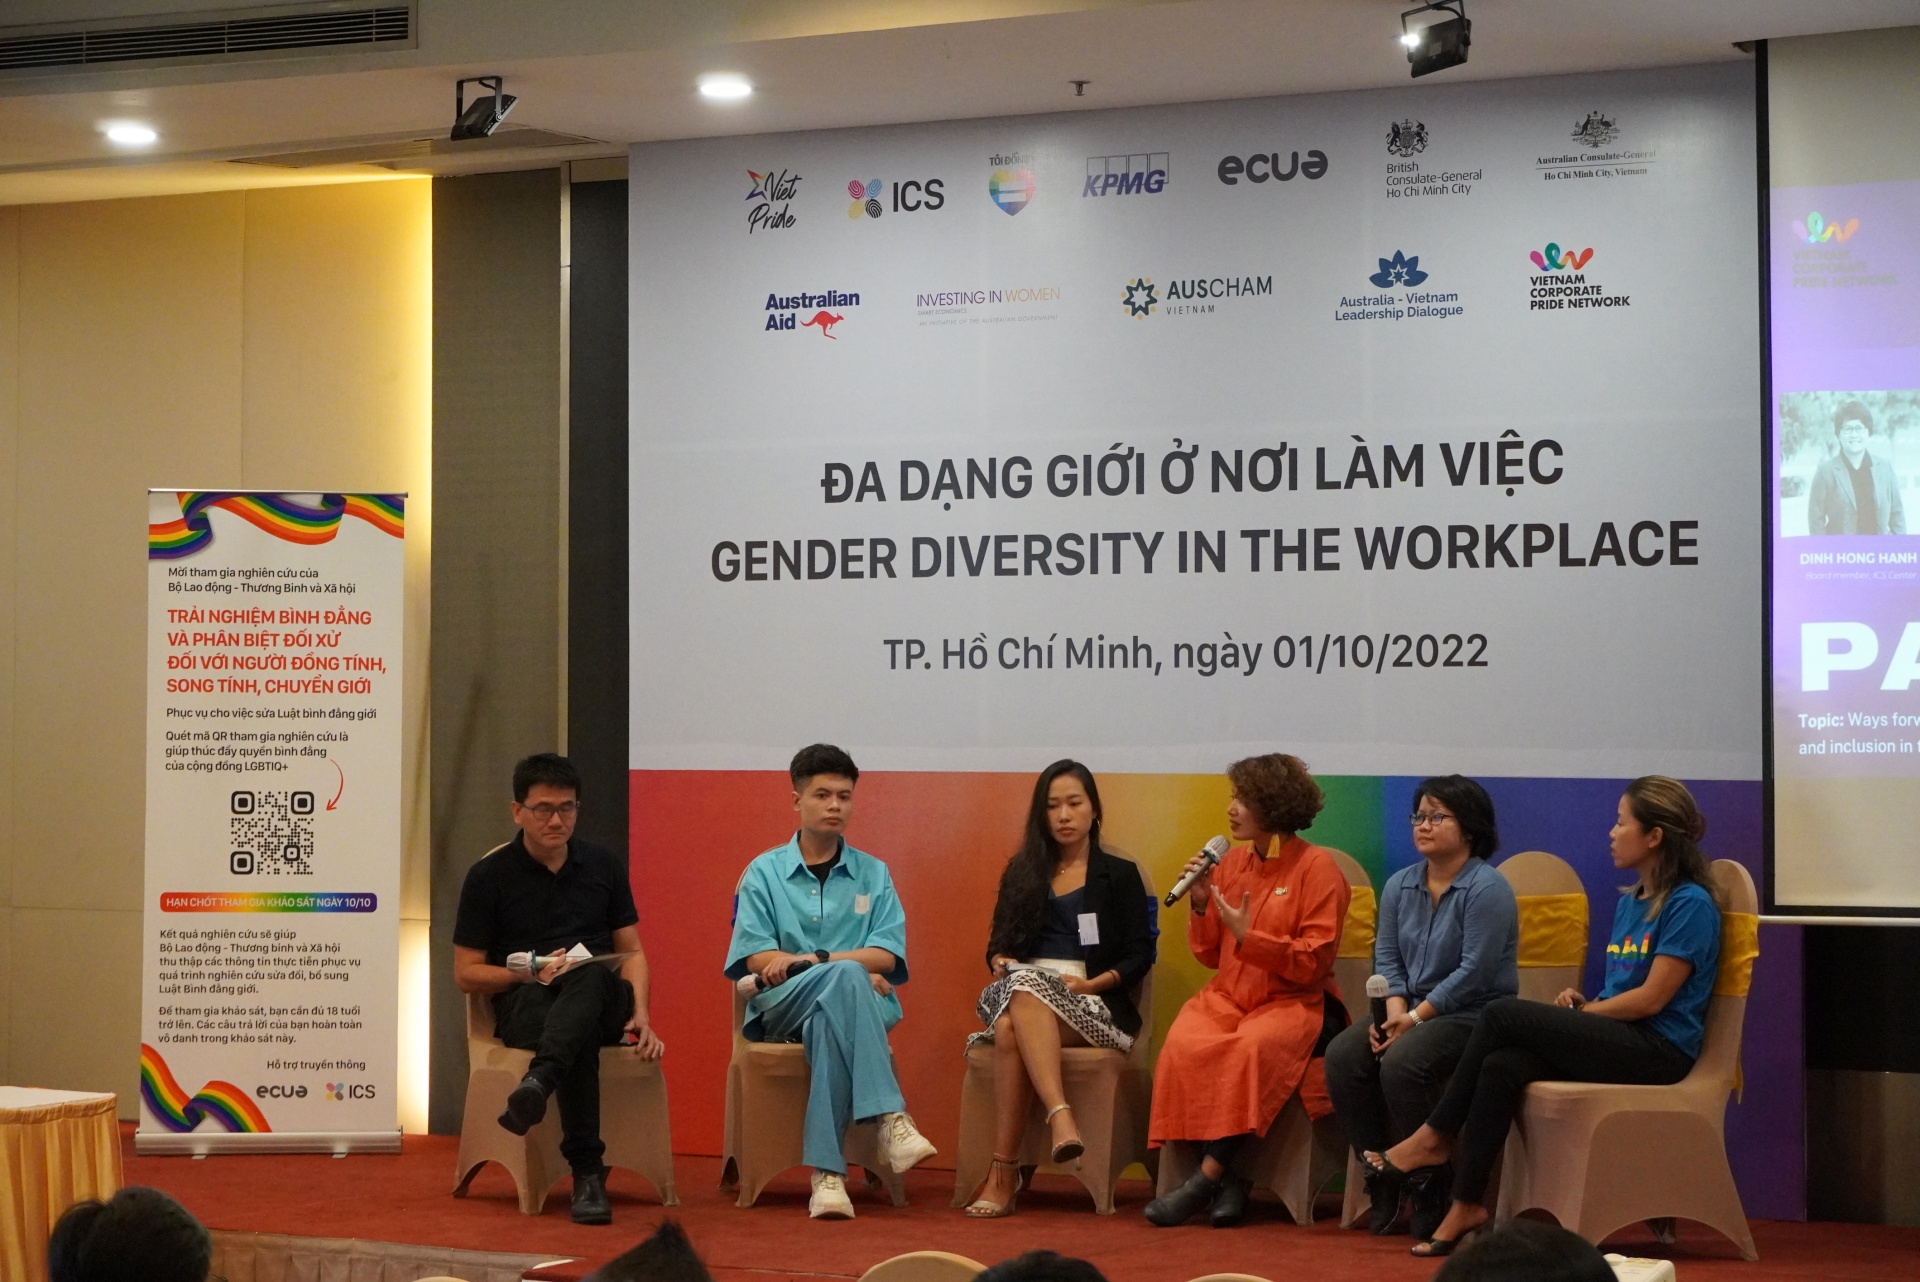 Promoting workplace gender equality and diversity in Vietnam